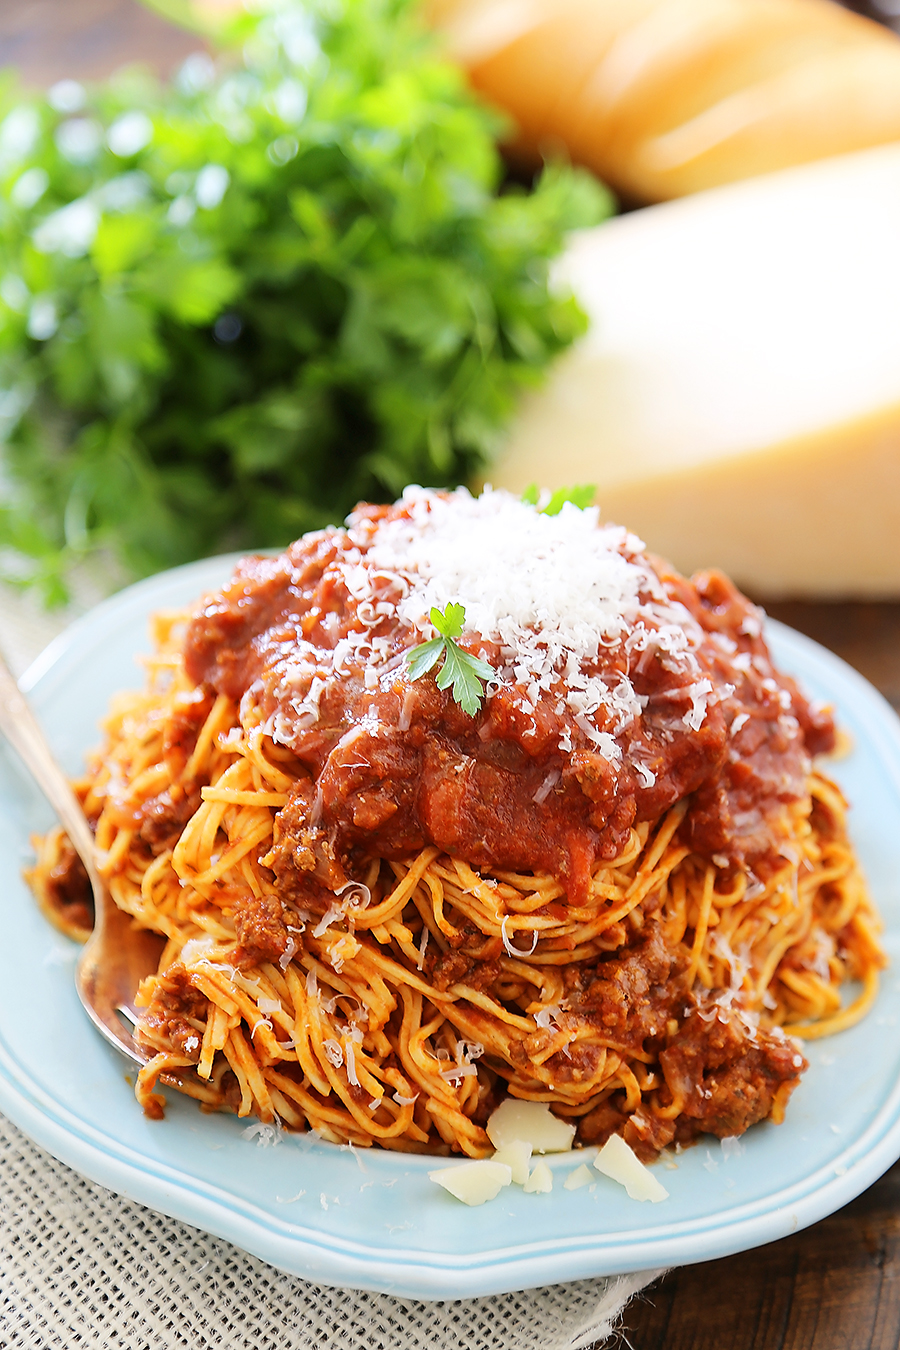 Slow Cooker Spaghetti Bolognese - A rich, classic Italian pasta sauce easily made in your slow cooker! Freeze for later, or dig in with a bowl of warm spaghetti! thecomfortofcooking.com